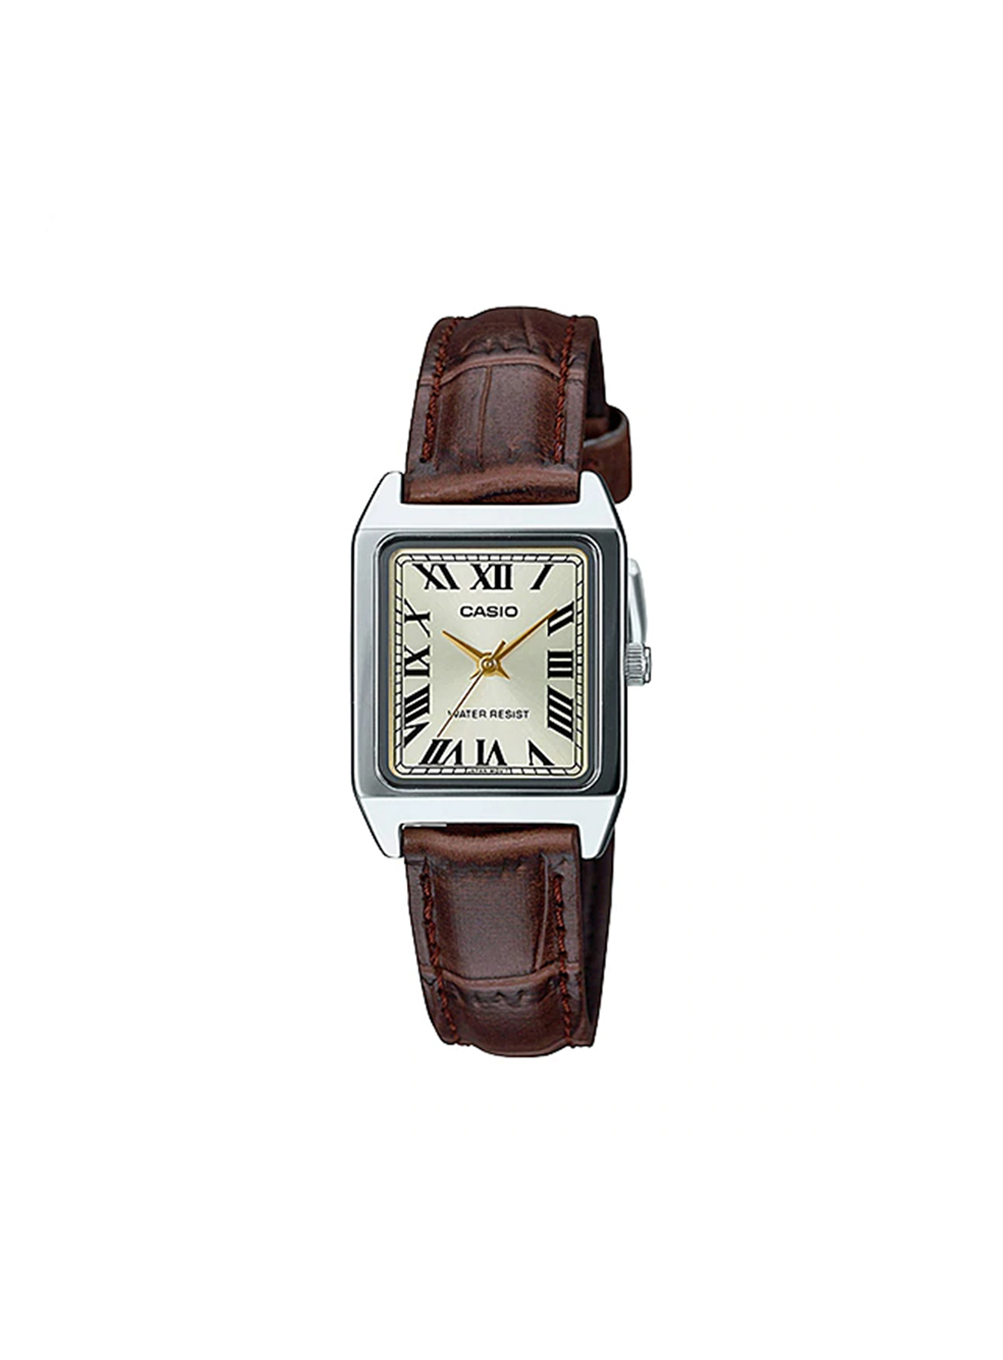 Brown leather wristwatch